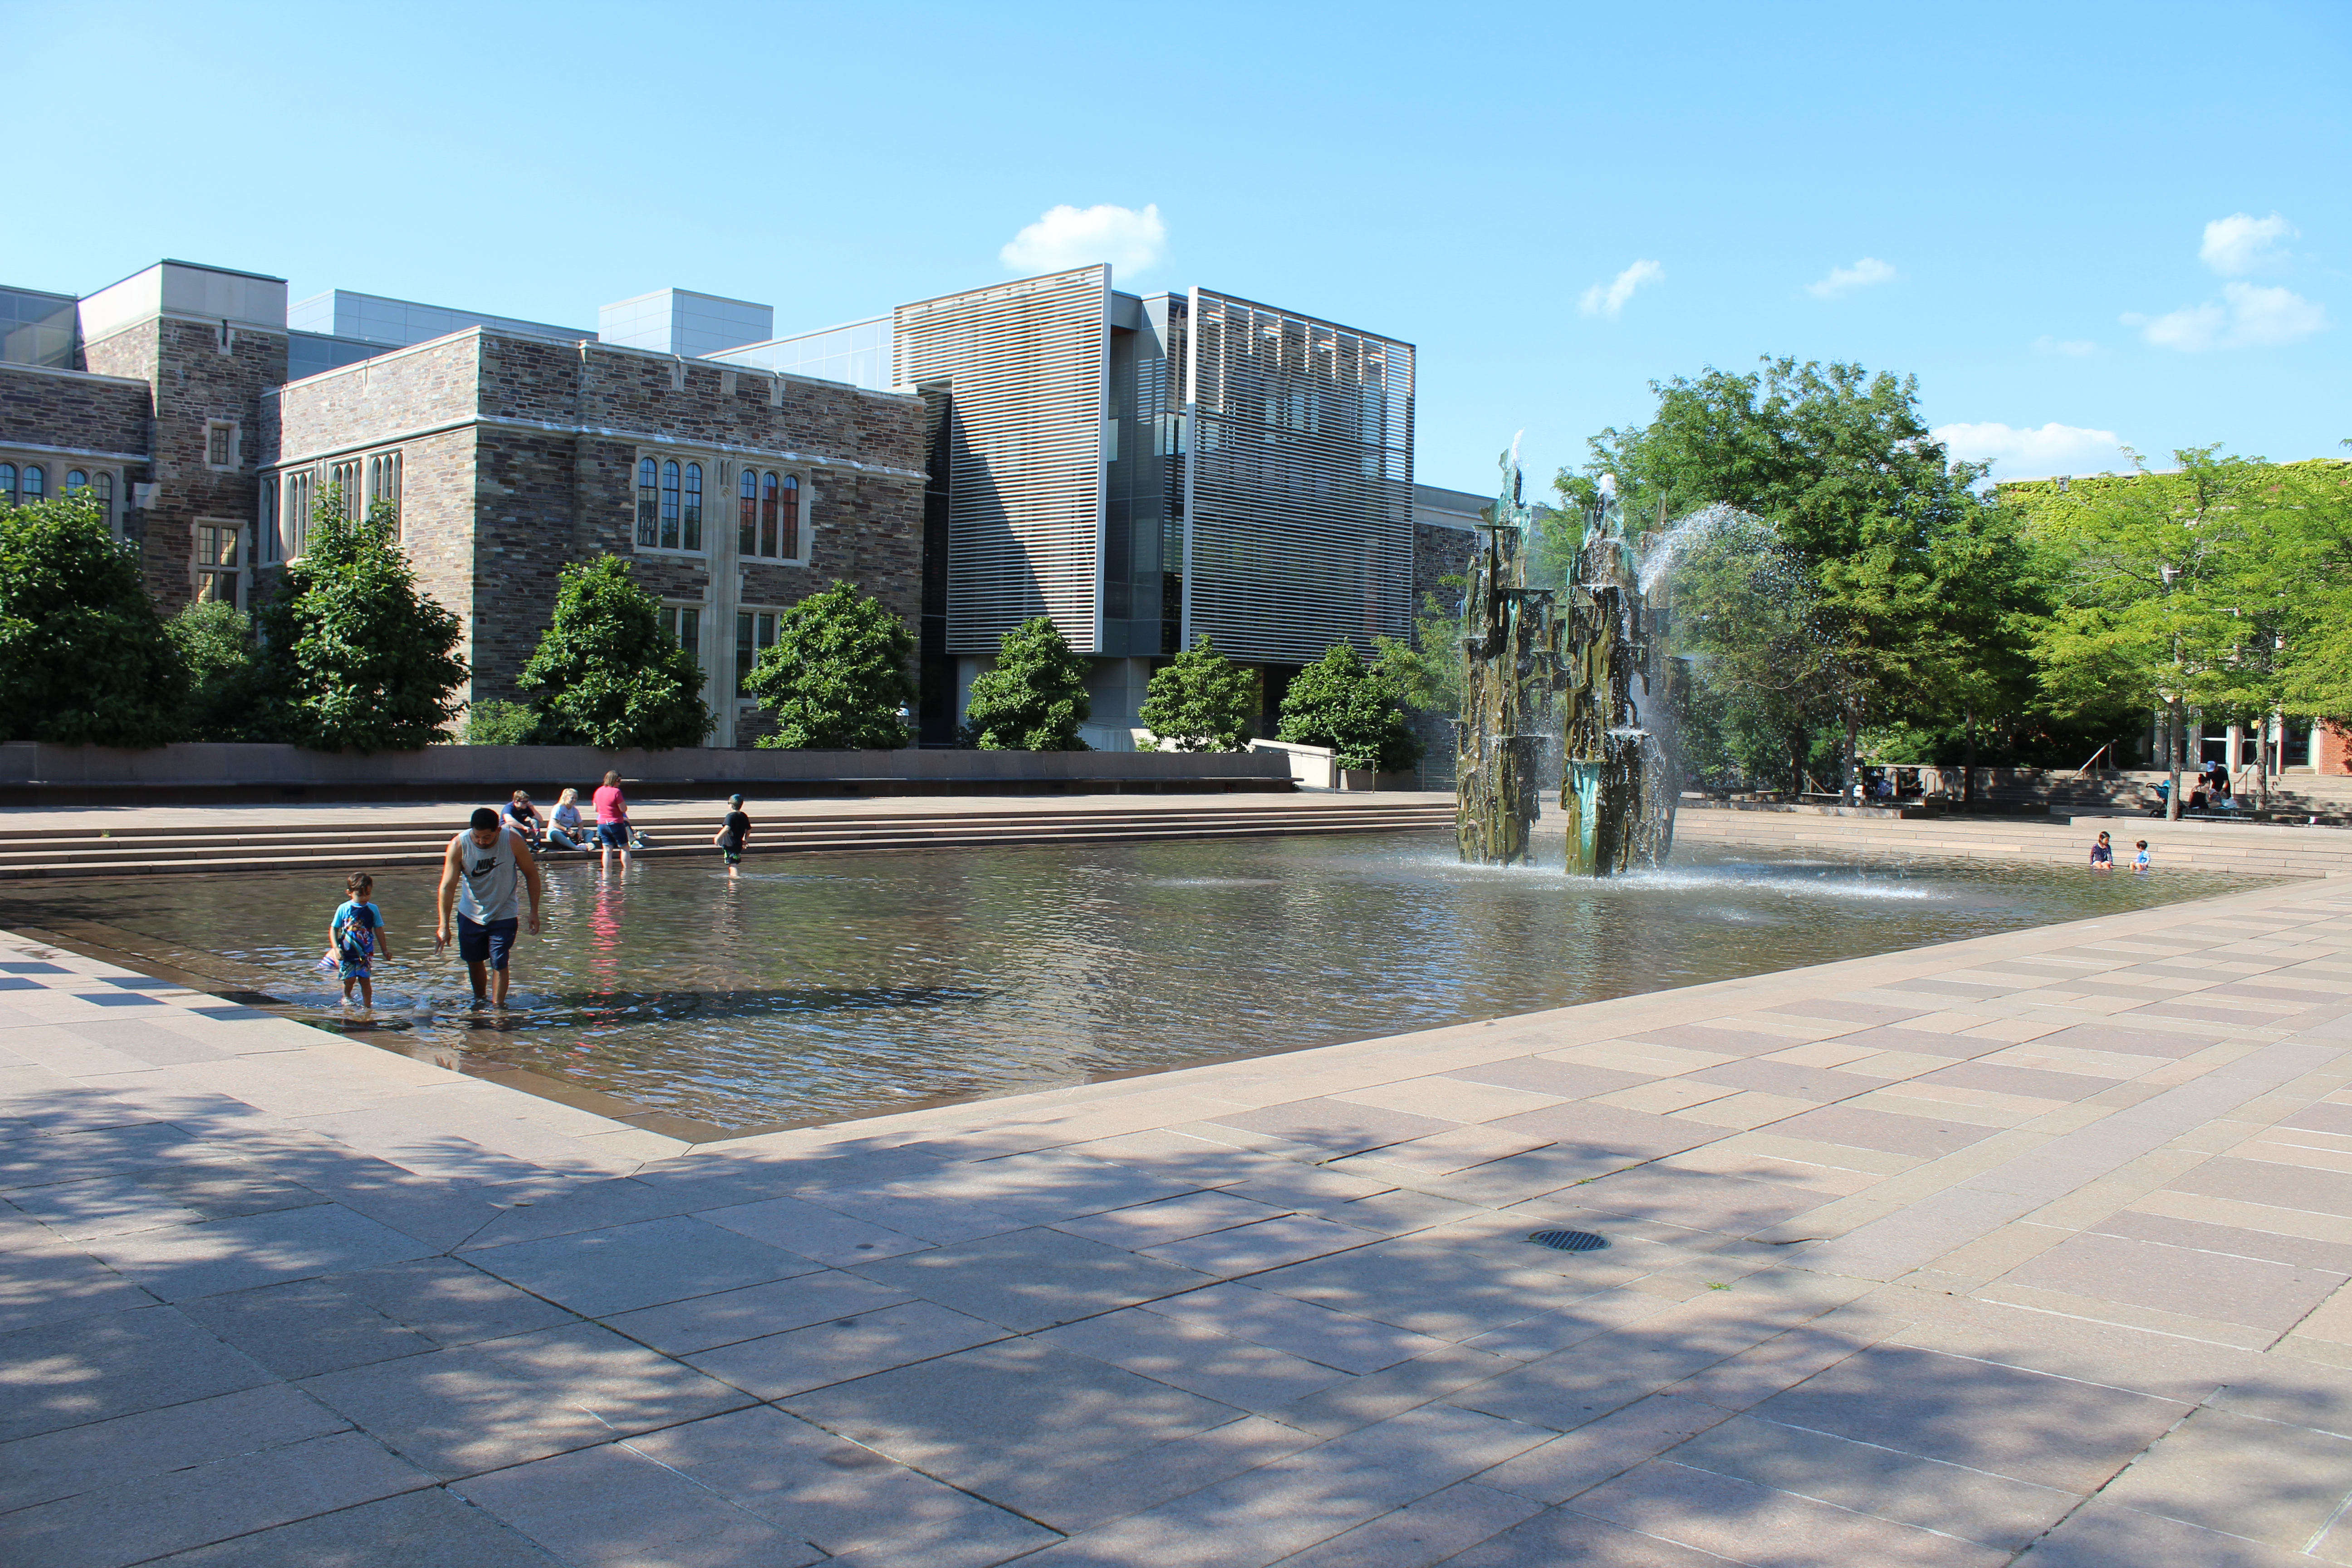 Reflecting pool and fountain in summer